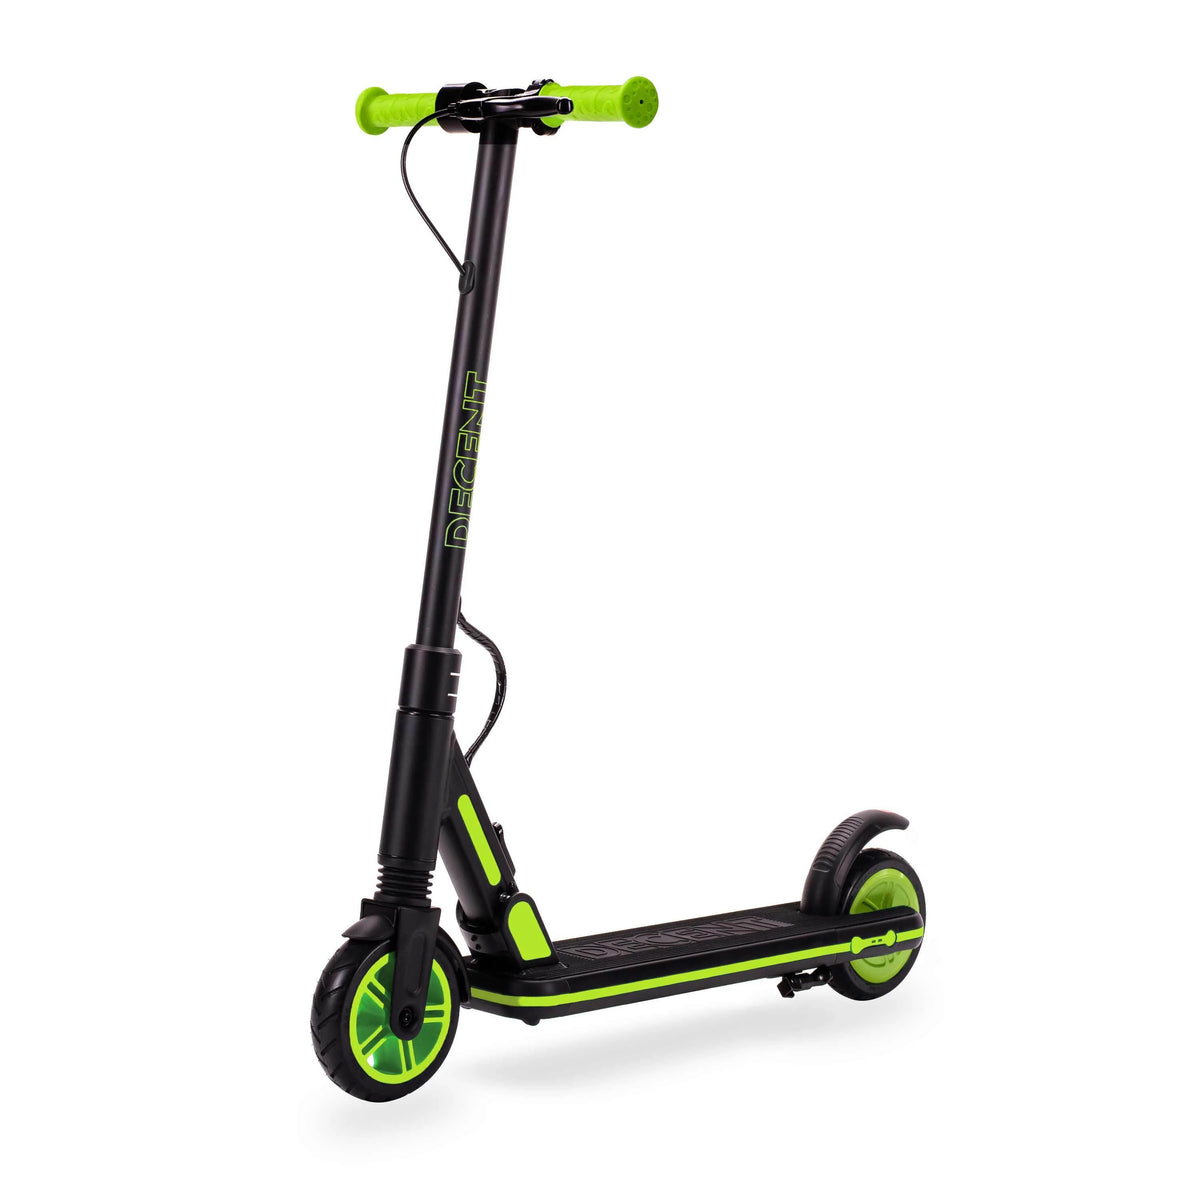 E-scooters: Silent menace or green godsend?